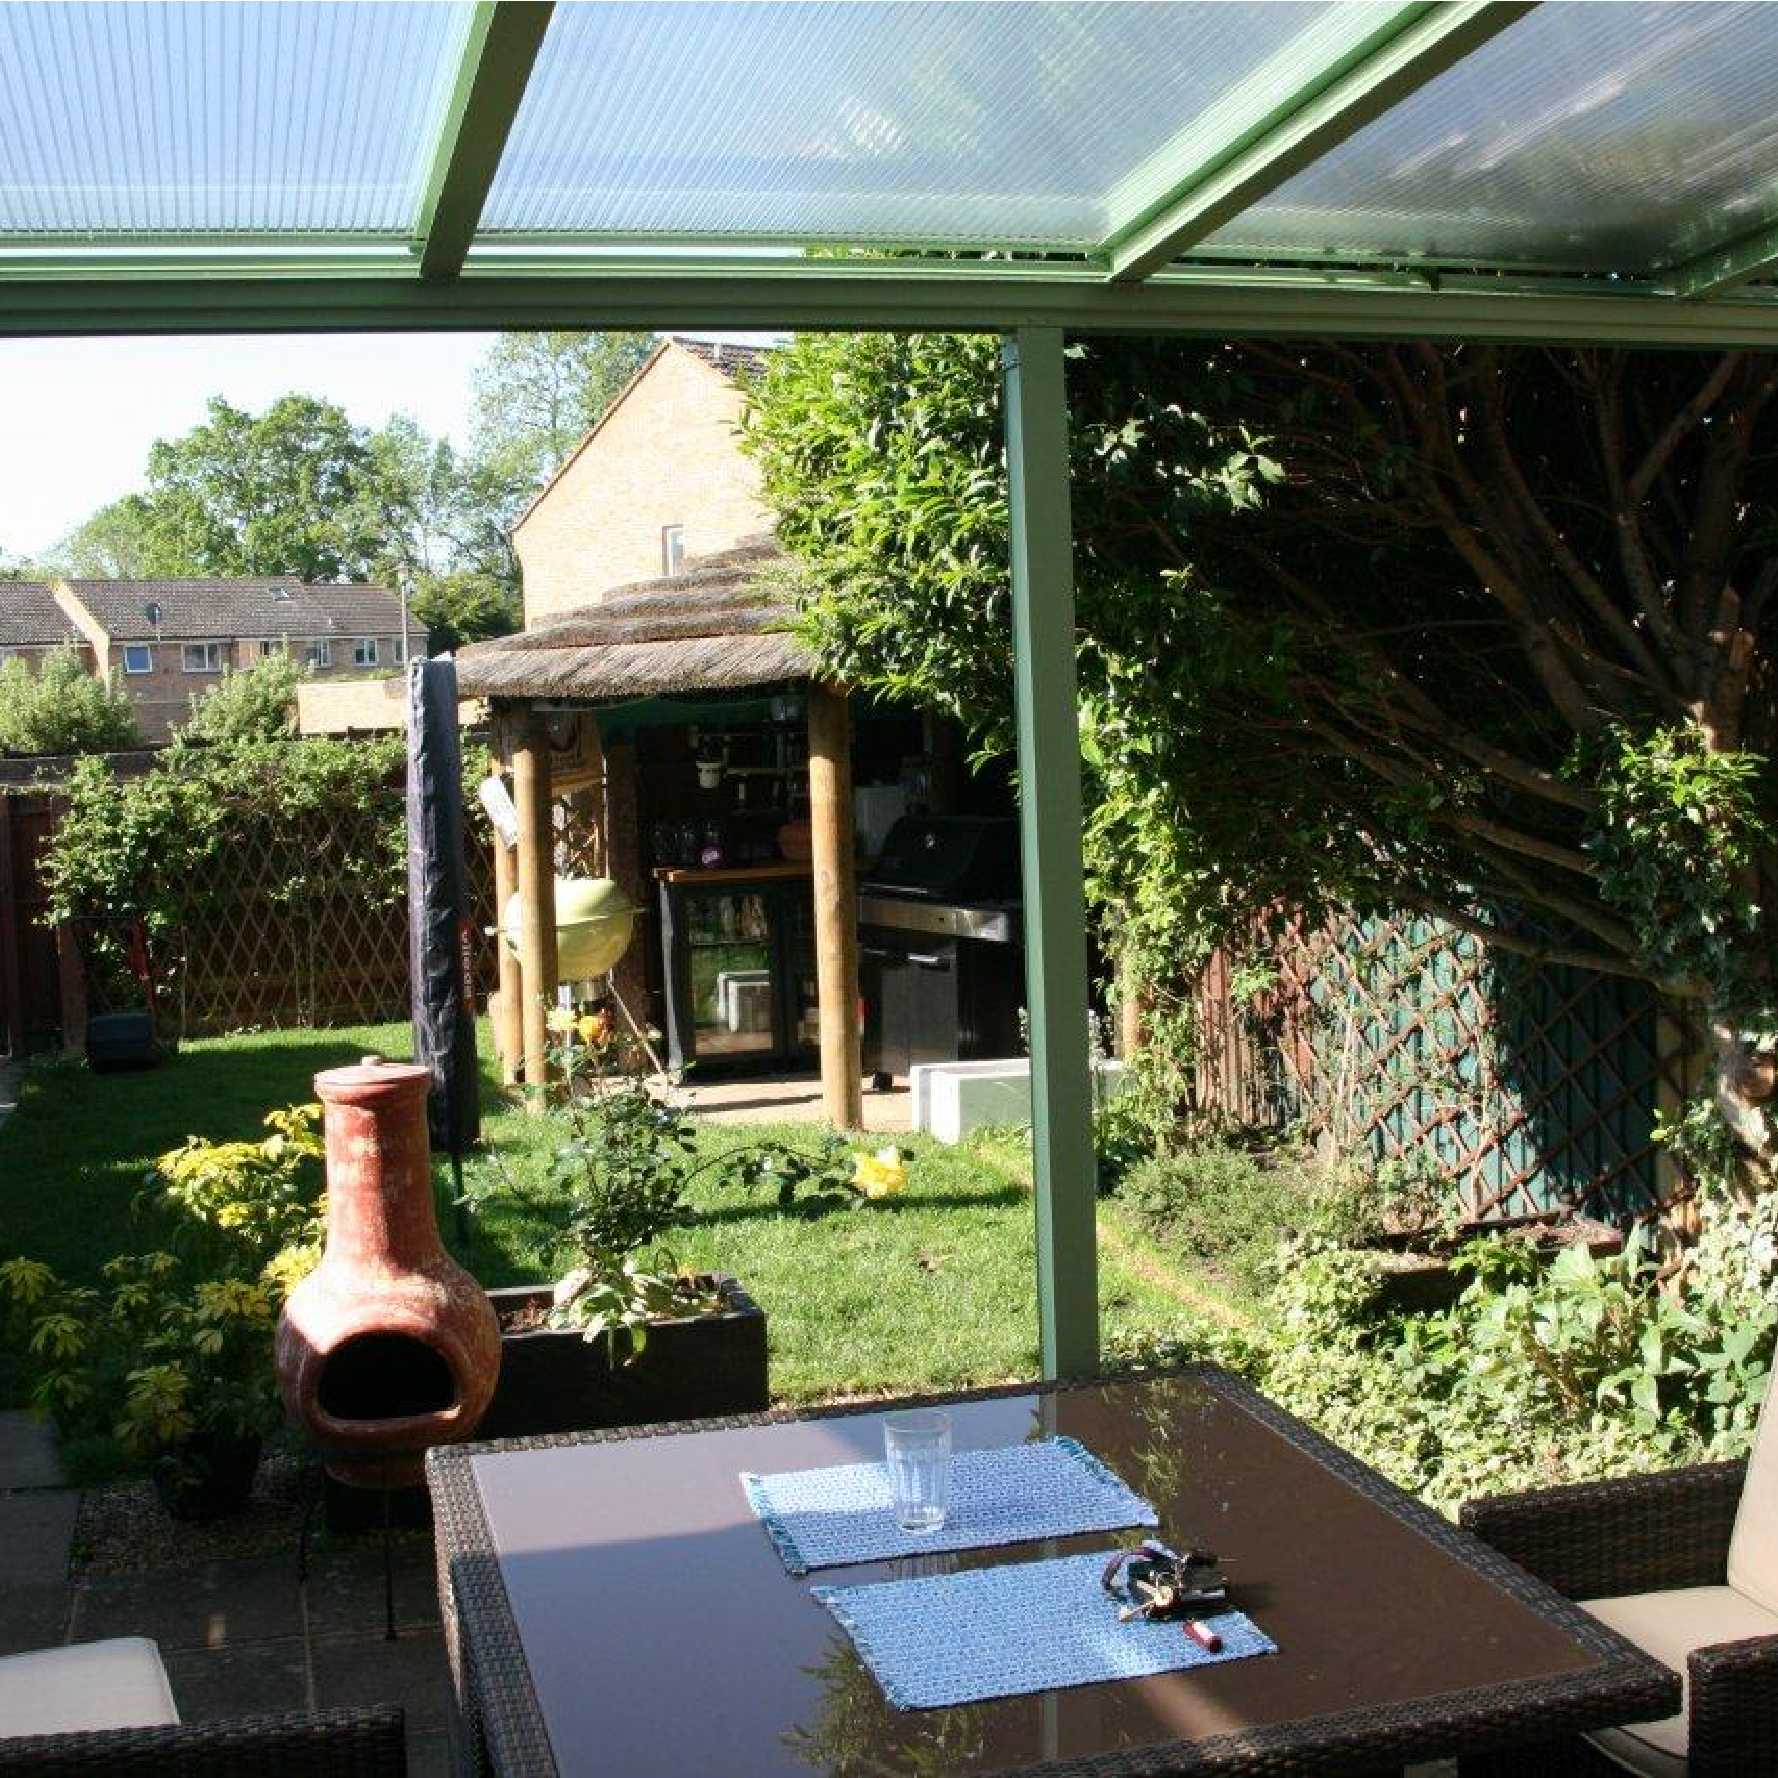 Affordable Omega Smart Lean-To Canopy, White with 16mm Polycarbonate Glazing - 8.4m (W) x 2.0m (P), (4) Supporting Posts